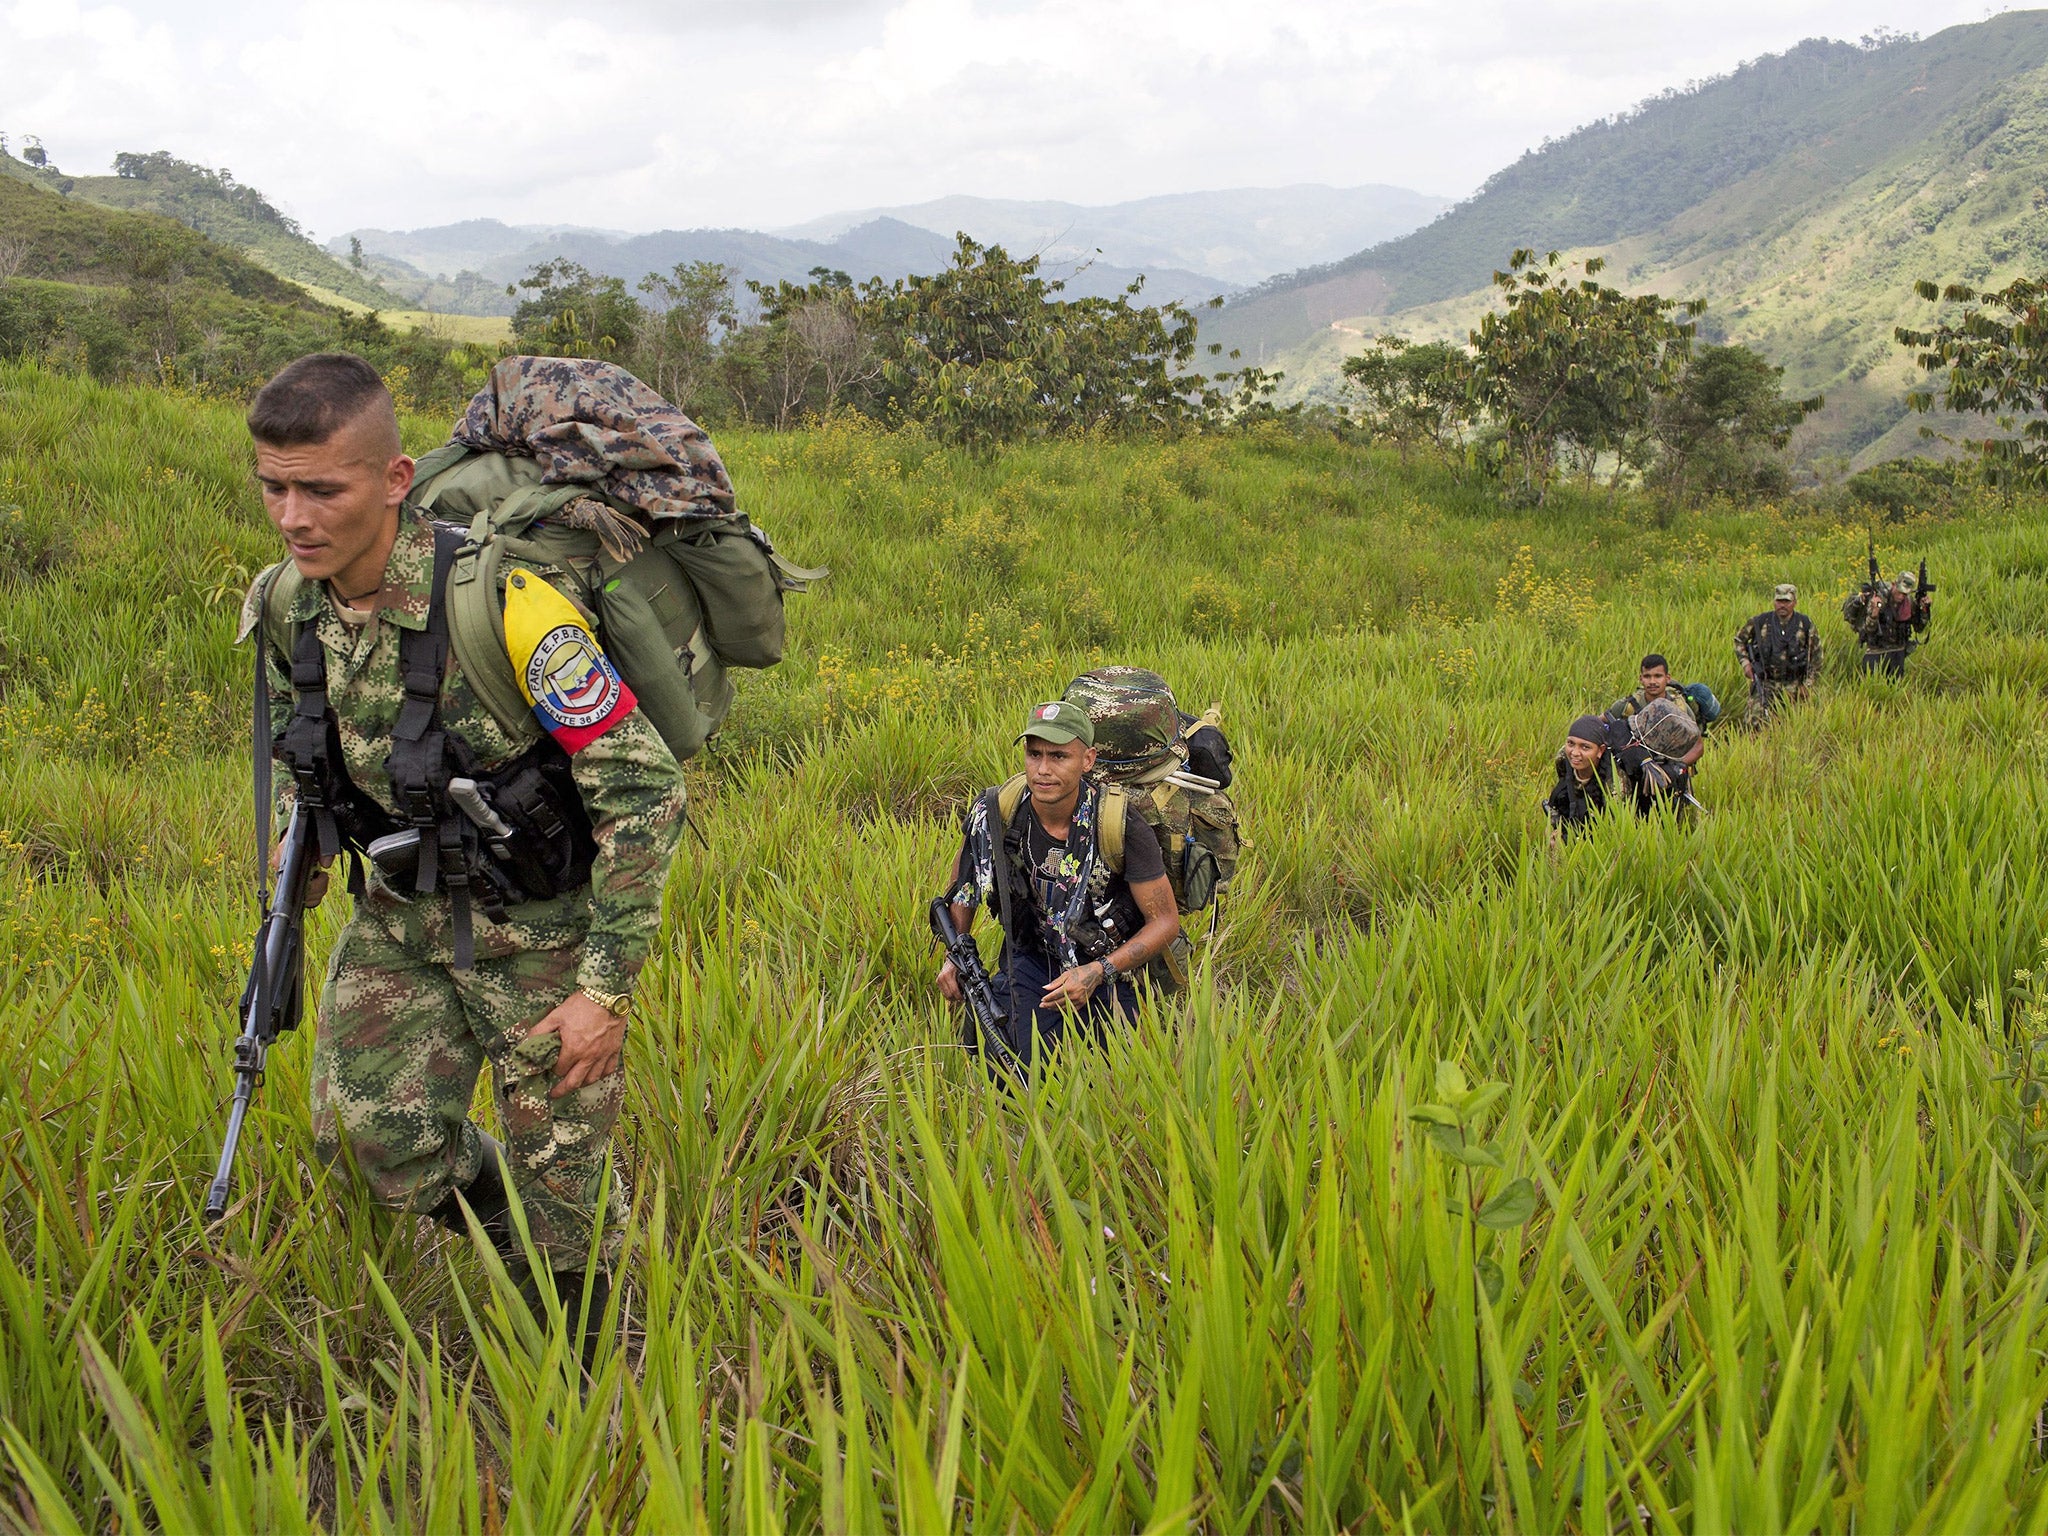 Members of Farc’s 36th Front on the move in the north-west